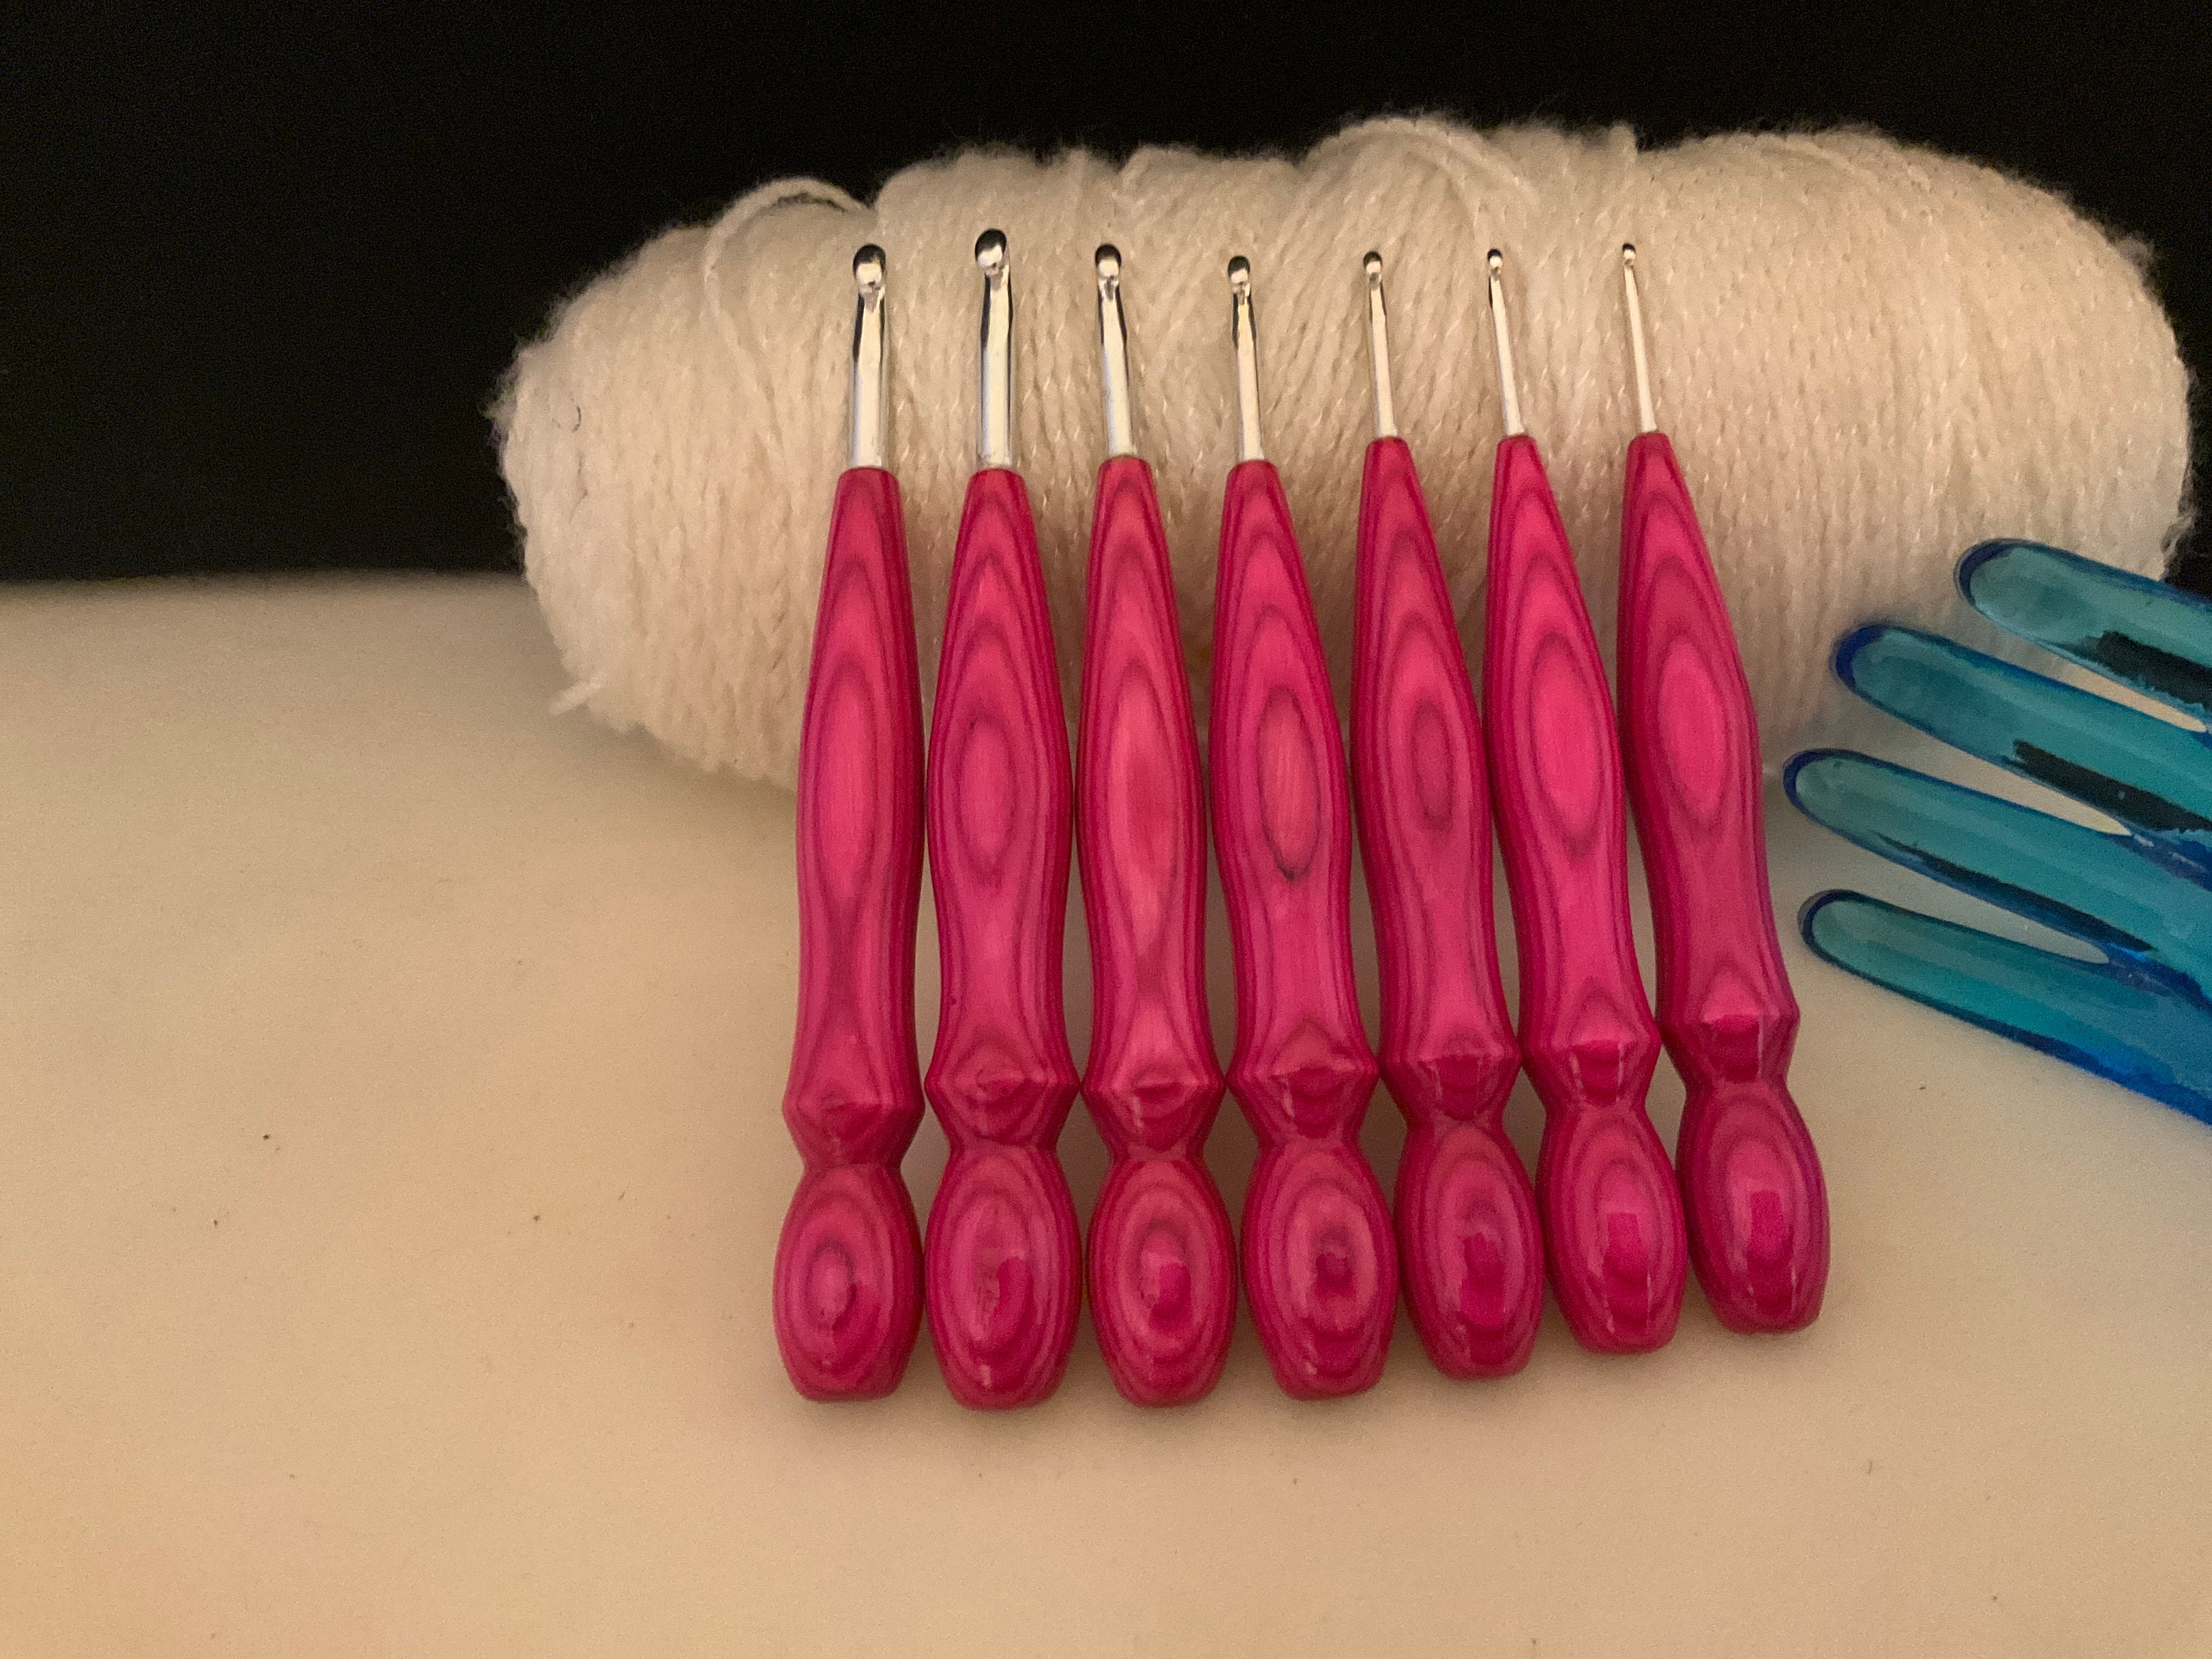 Crochet Hooks Aluminum Crochet Hooks, 8mm and 9mm, Red Blue, Tool Supply  Handmade, Supplies for Making, Ready to Ship, Comfort Grip Soft 